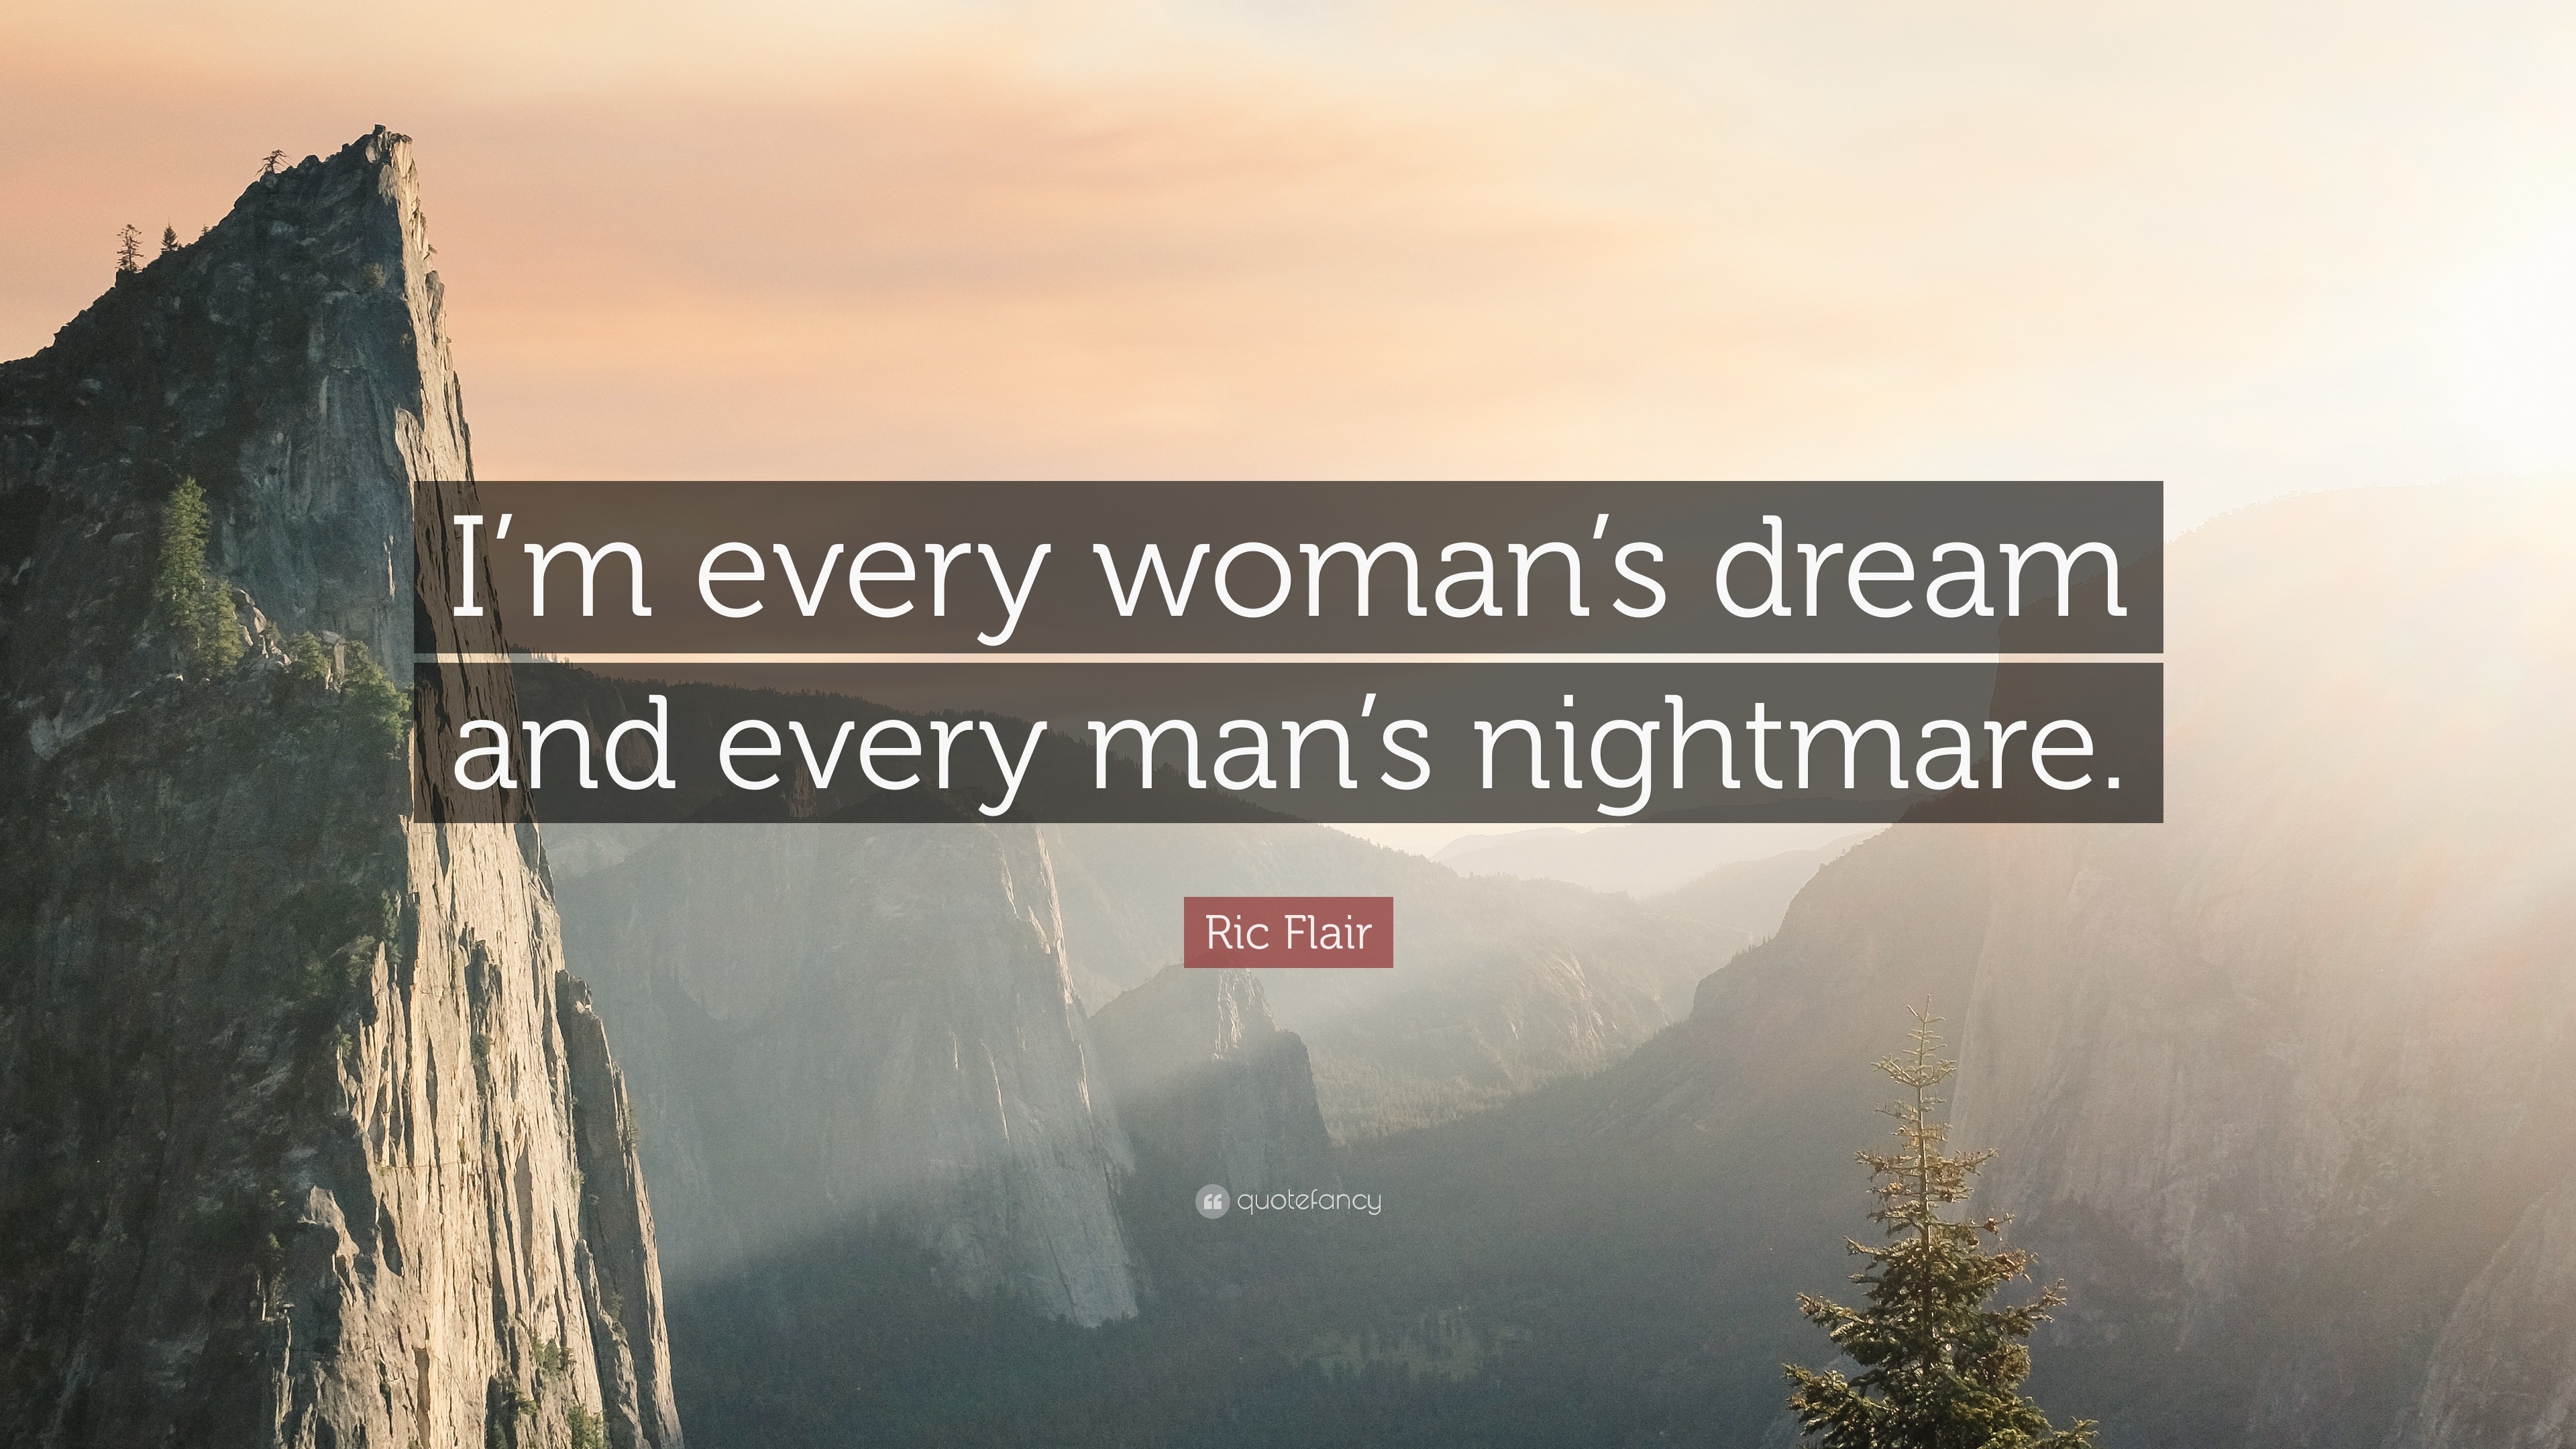 3840x2160 Ric Flair Quote: “I'm every woman's dream and every man's nightmare.